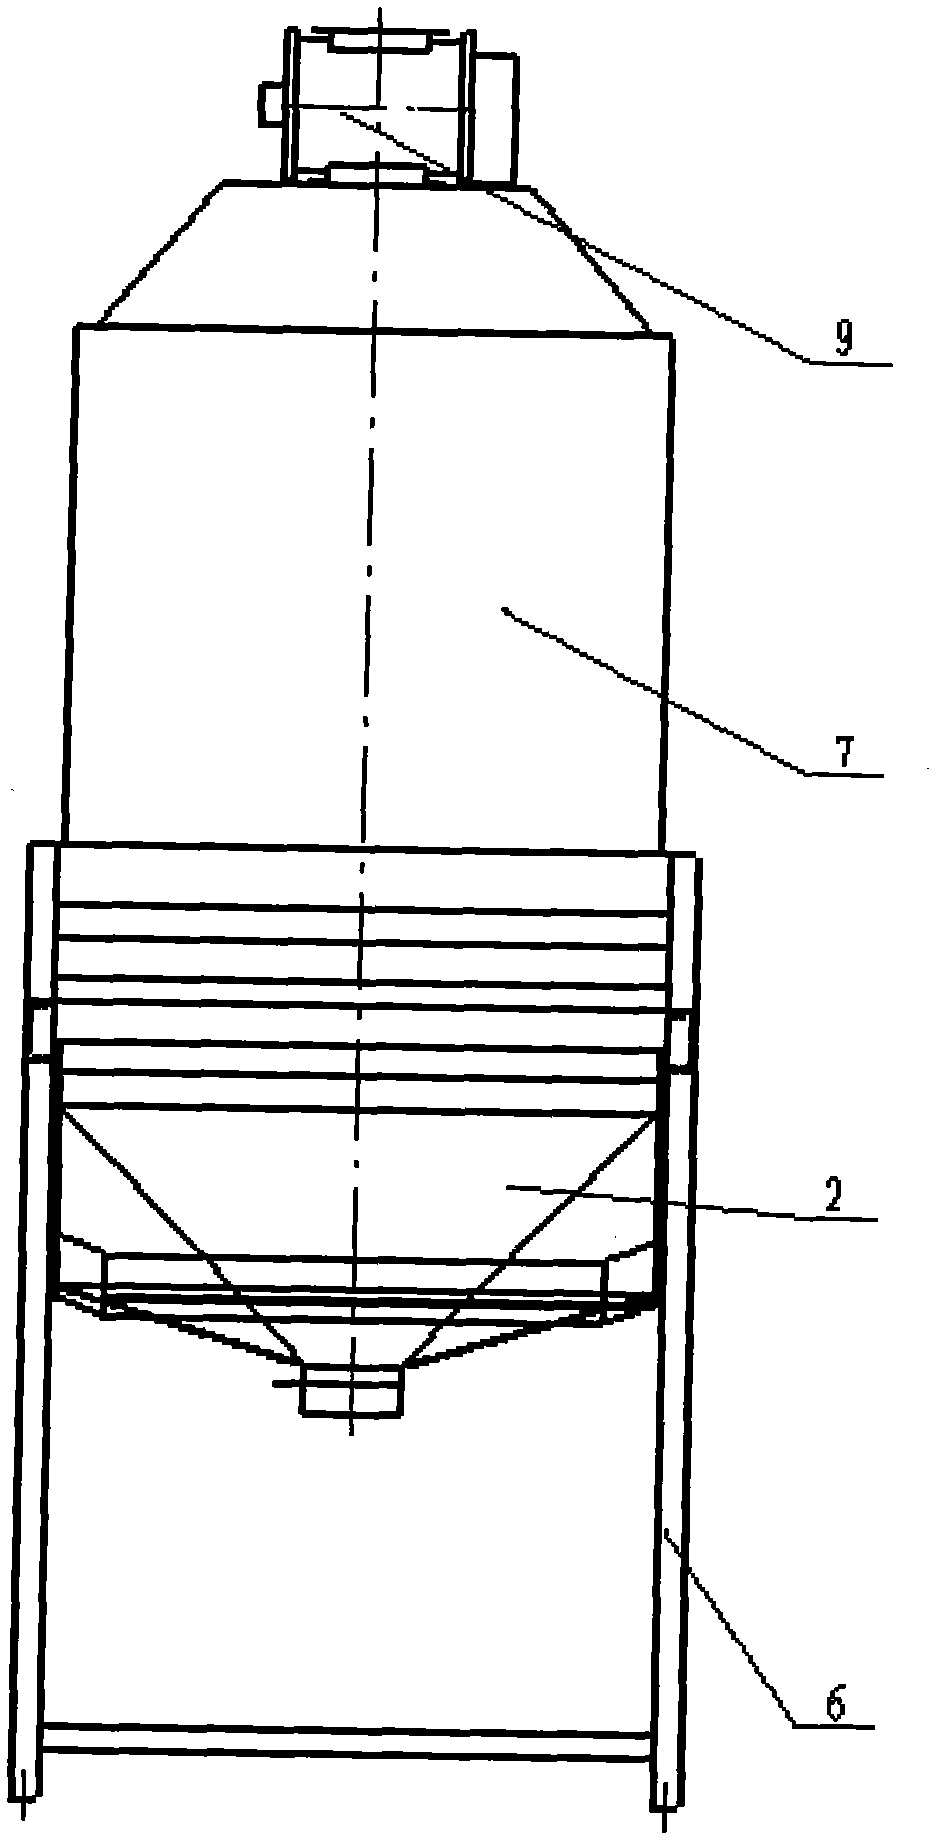 Reverse-flow type cooling vibrating screen